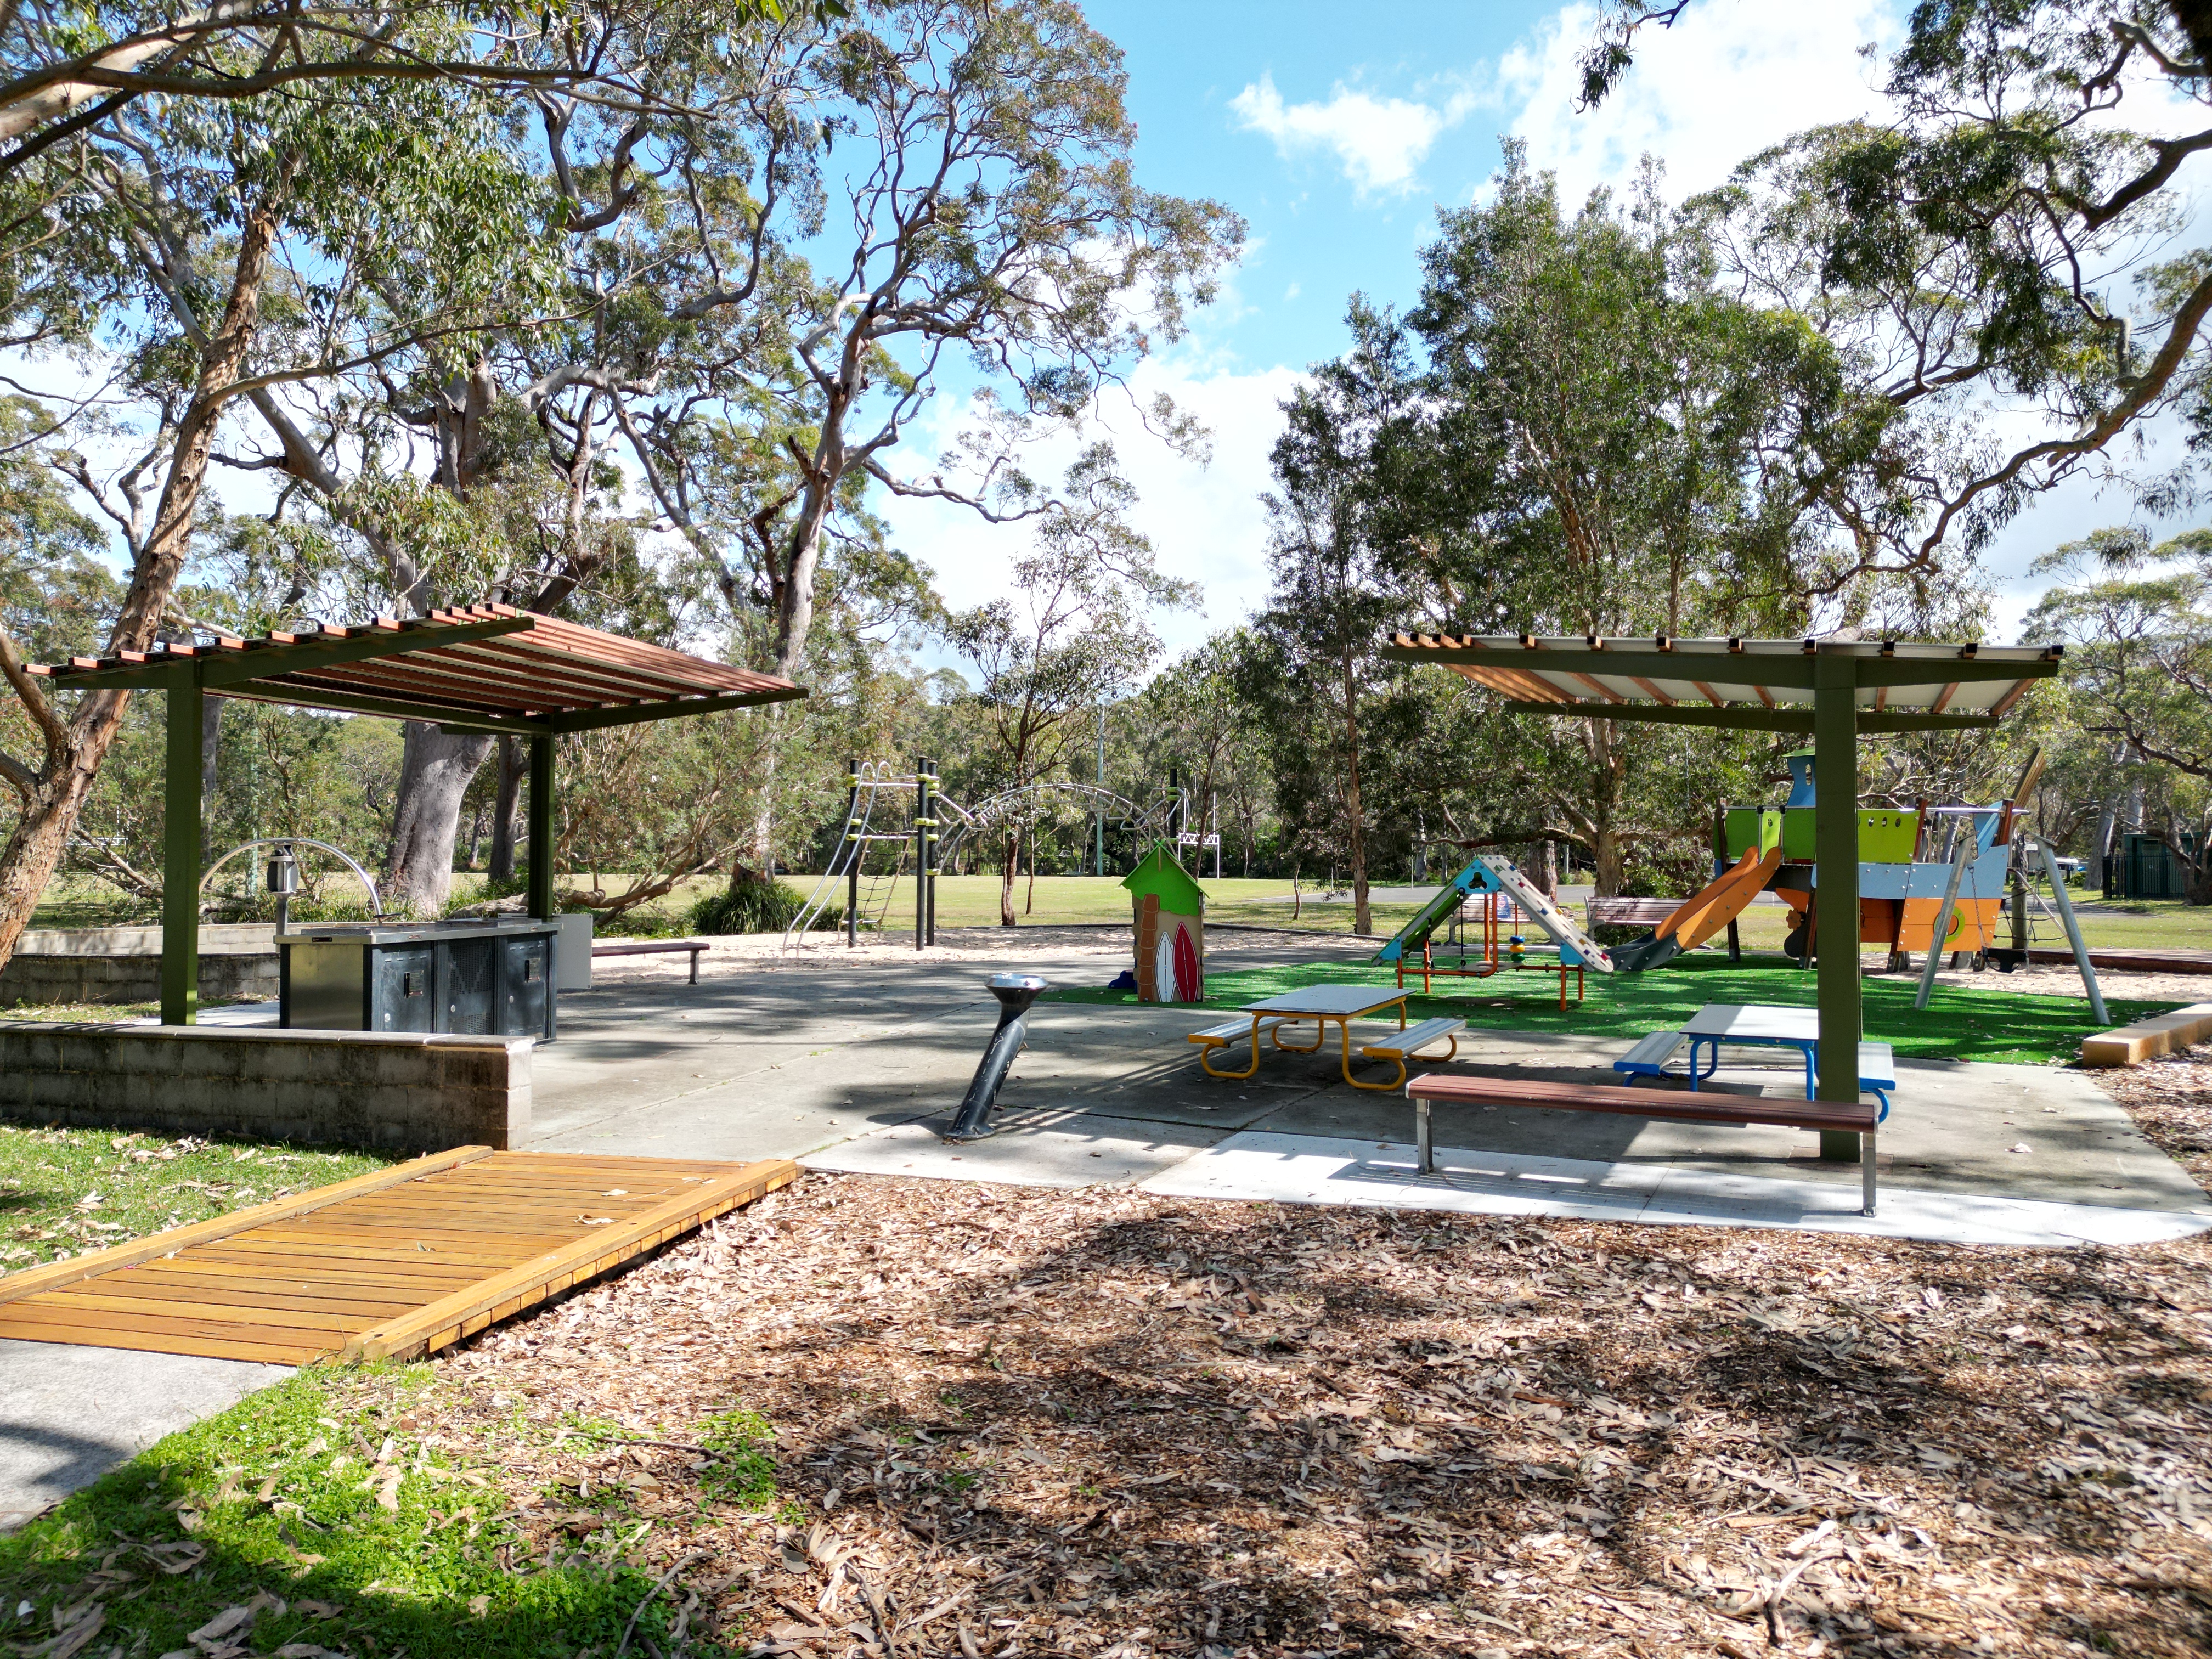 Park with picnic facilities, pathway and play equipment